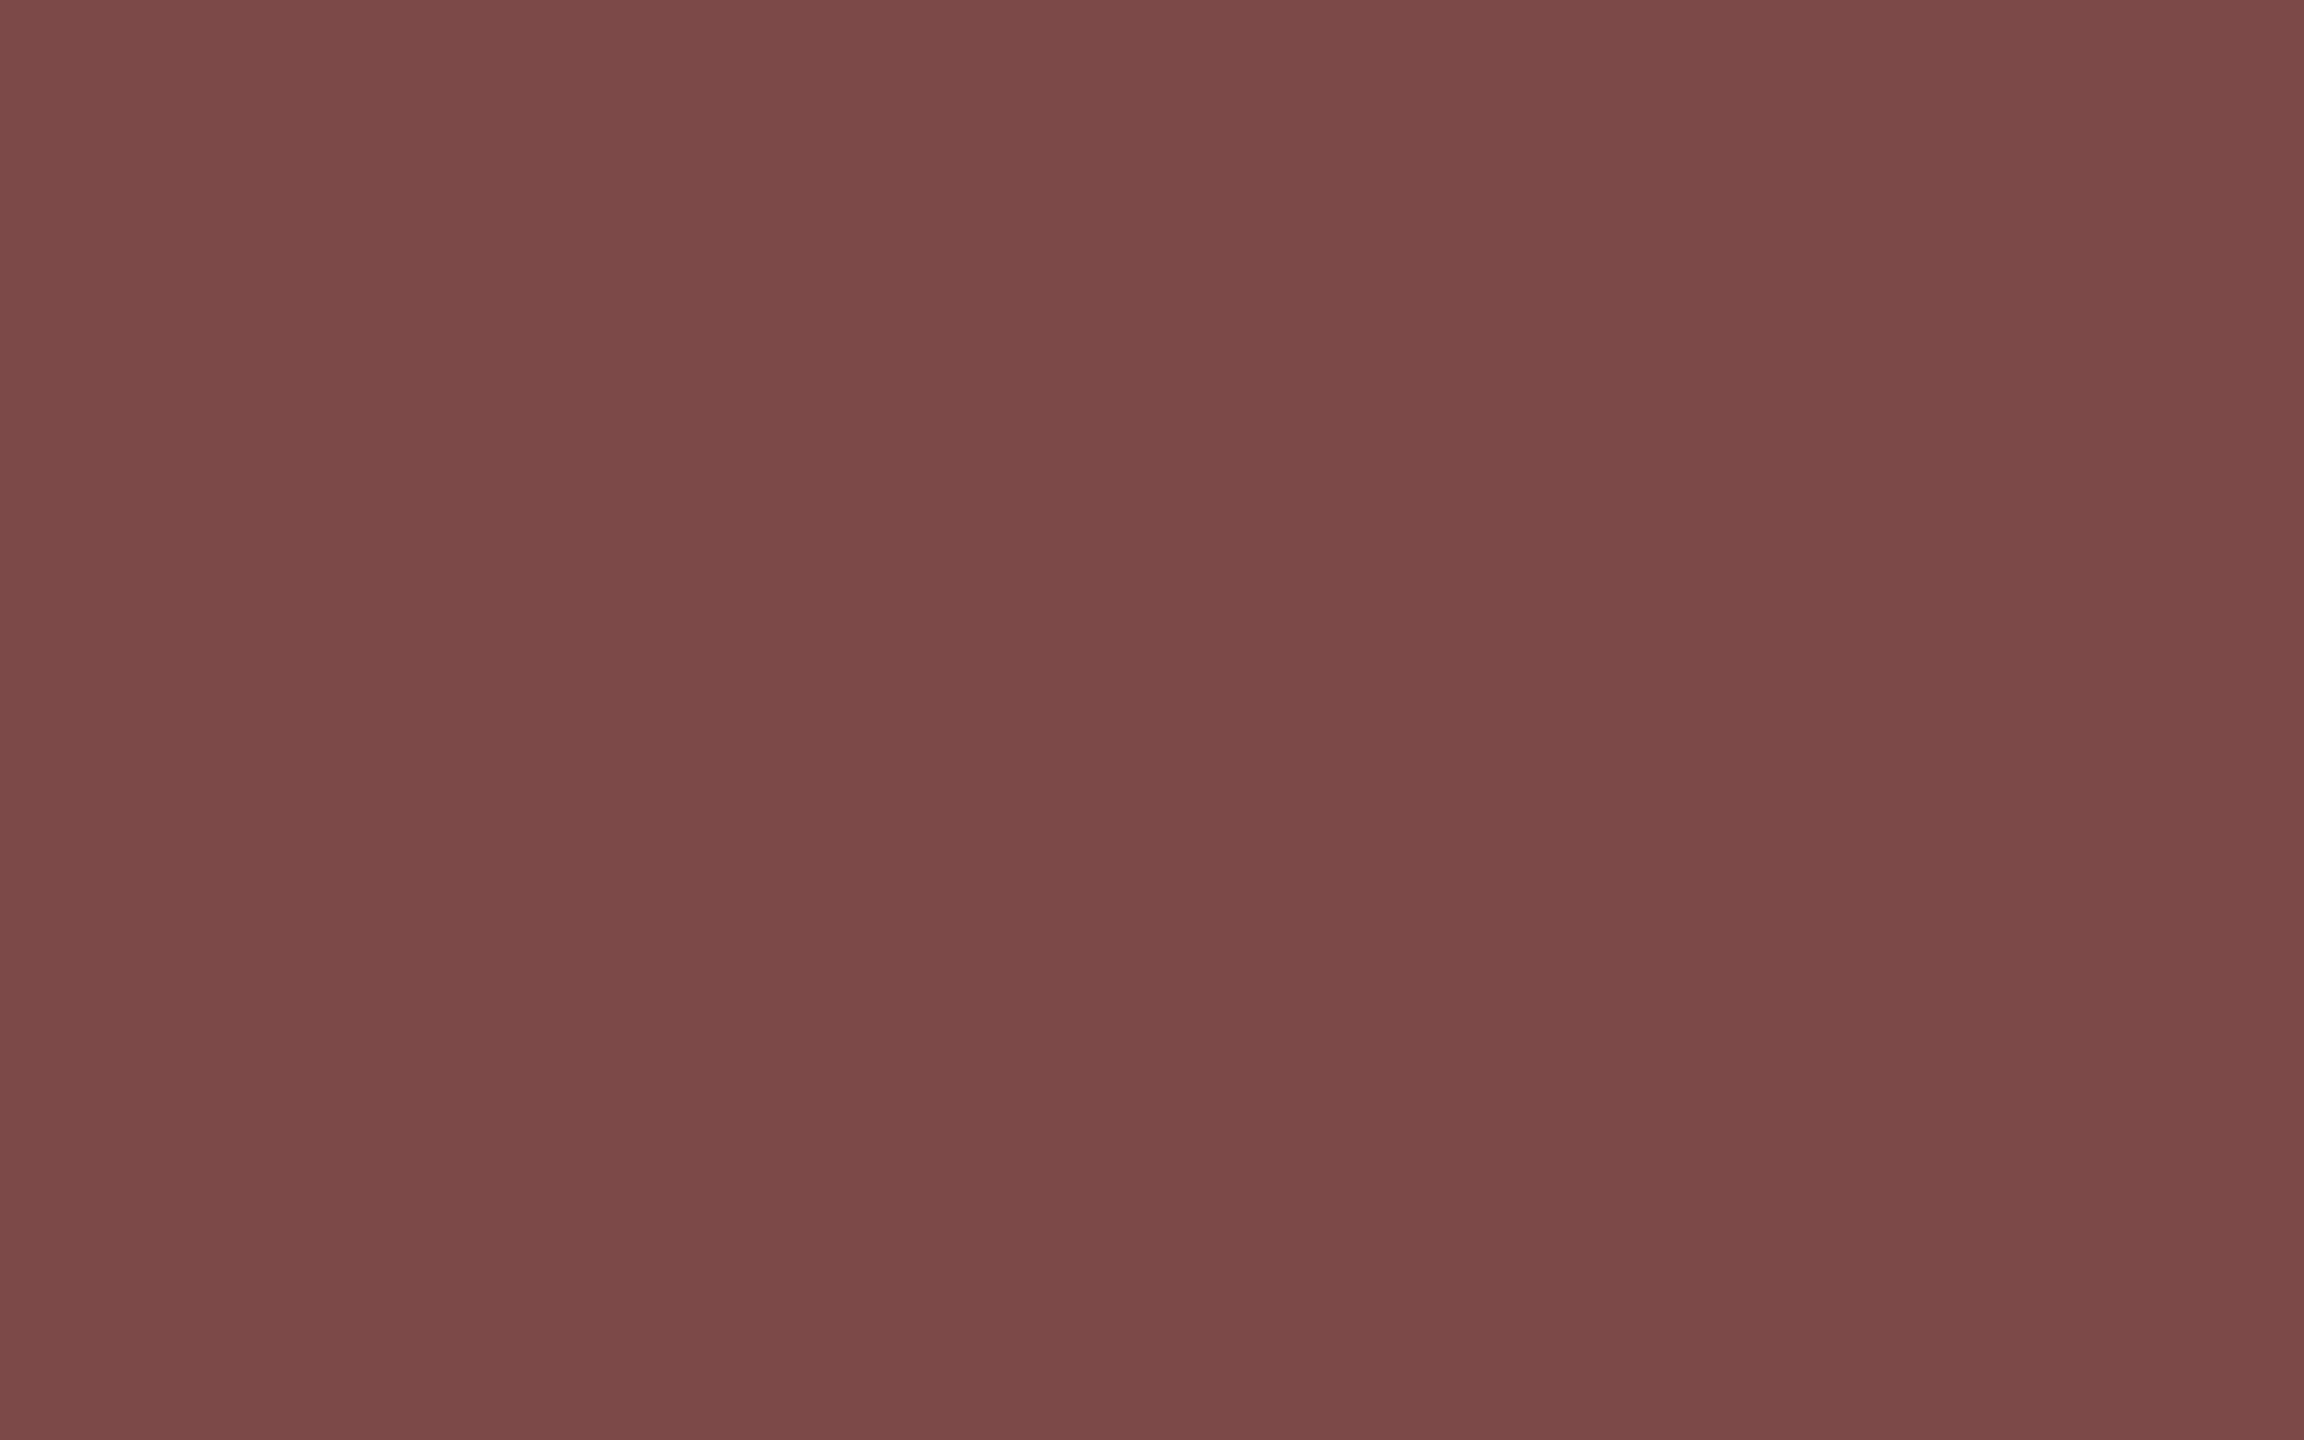 2304x1440 Tuscan Red Solid Color Background